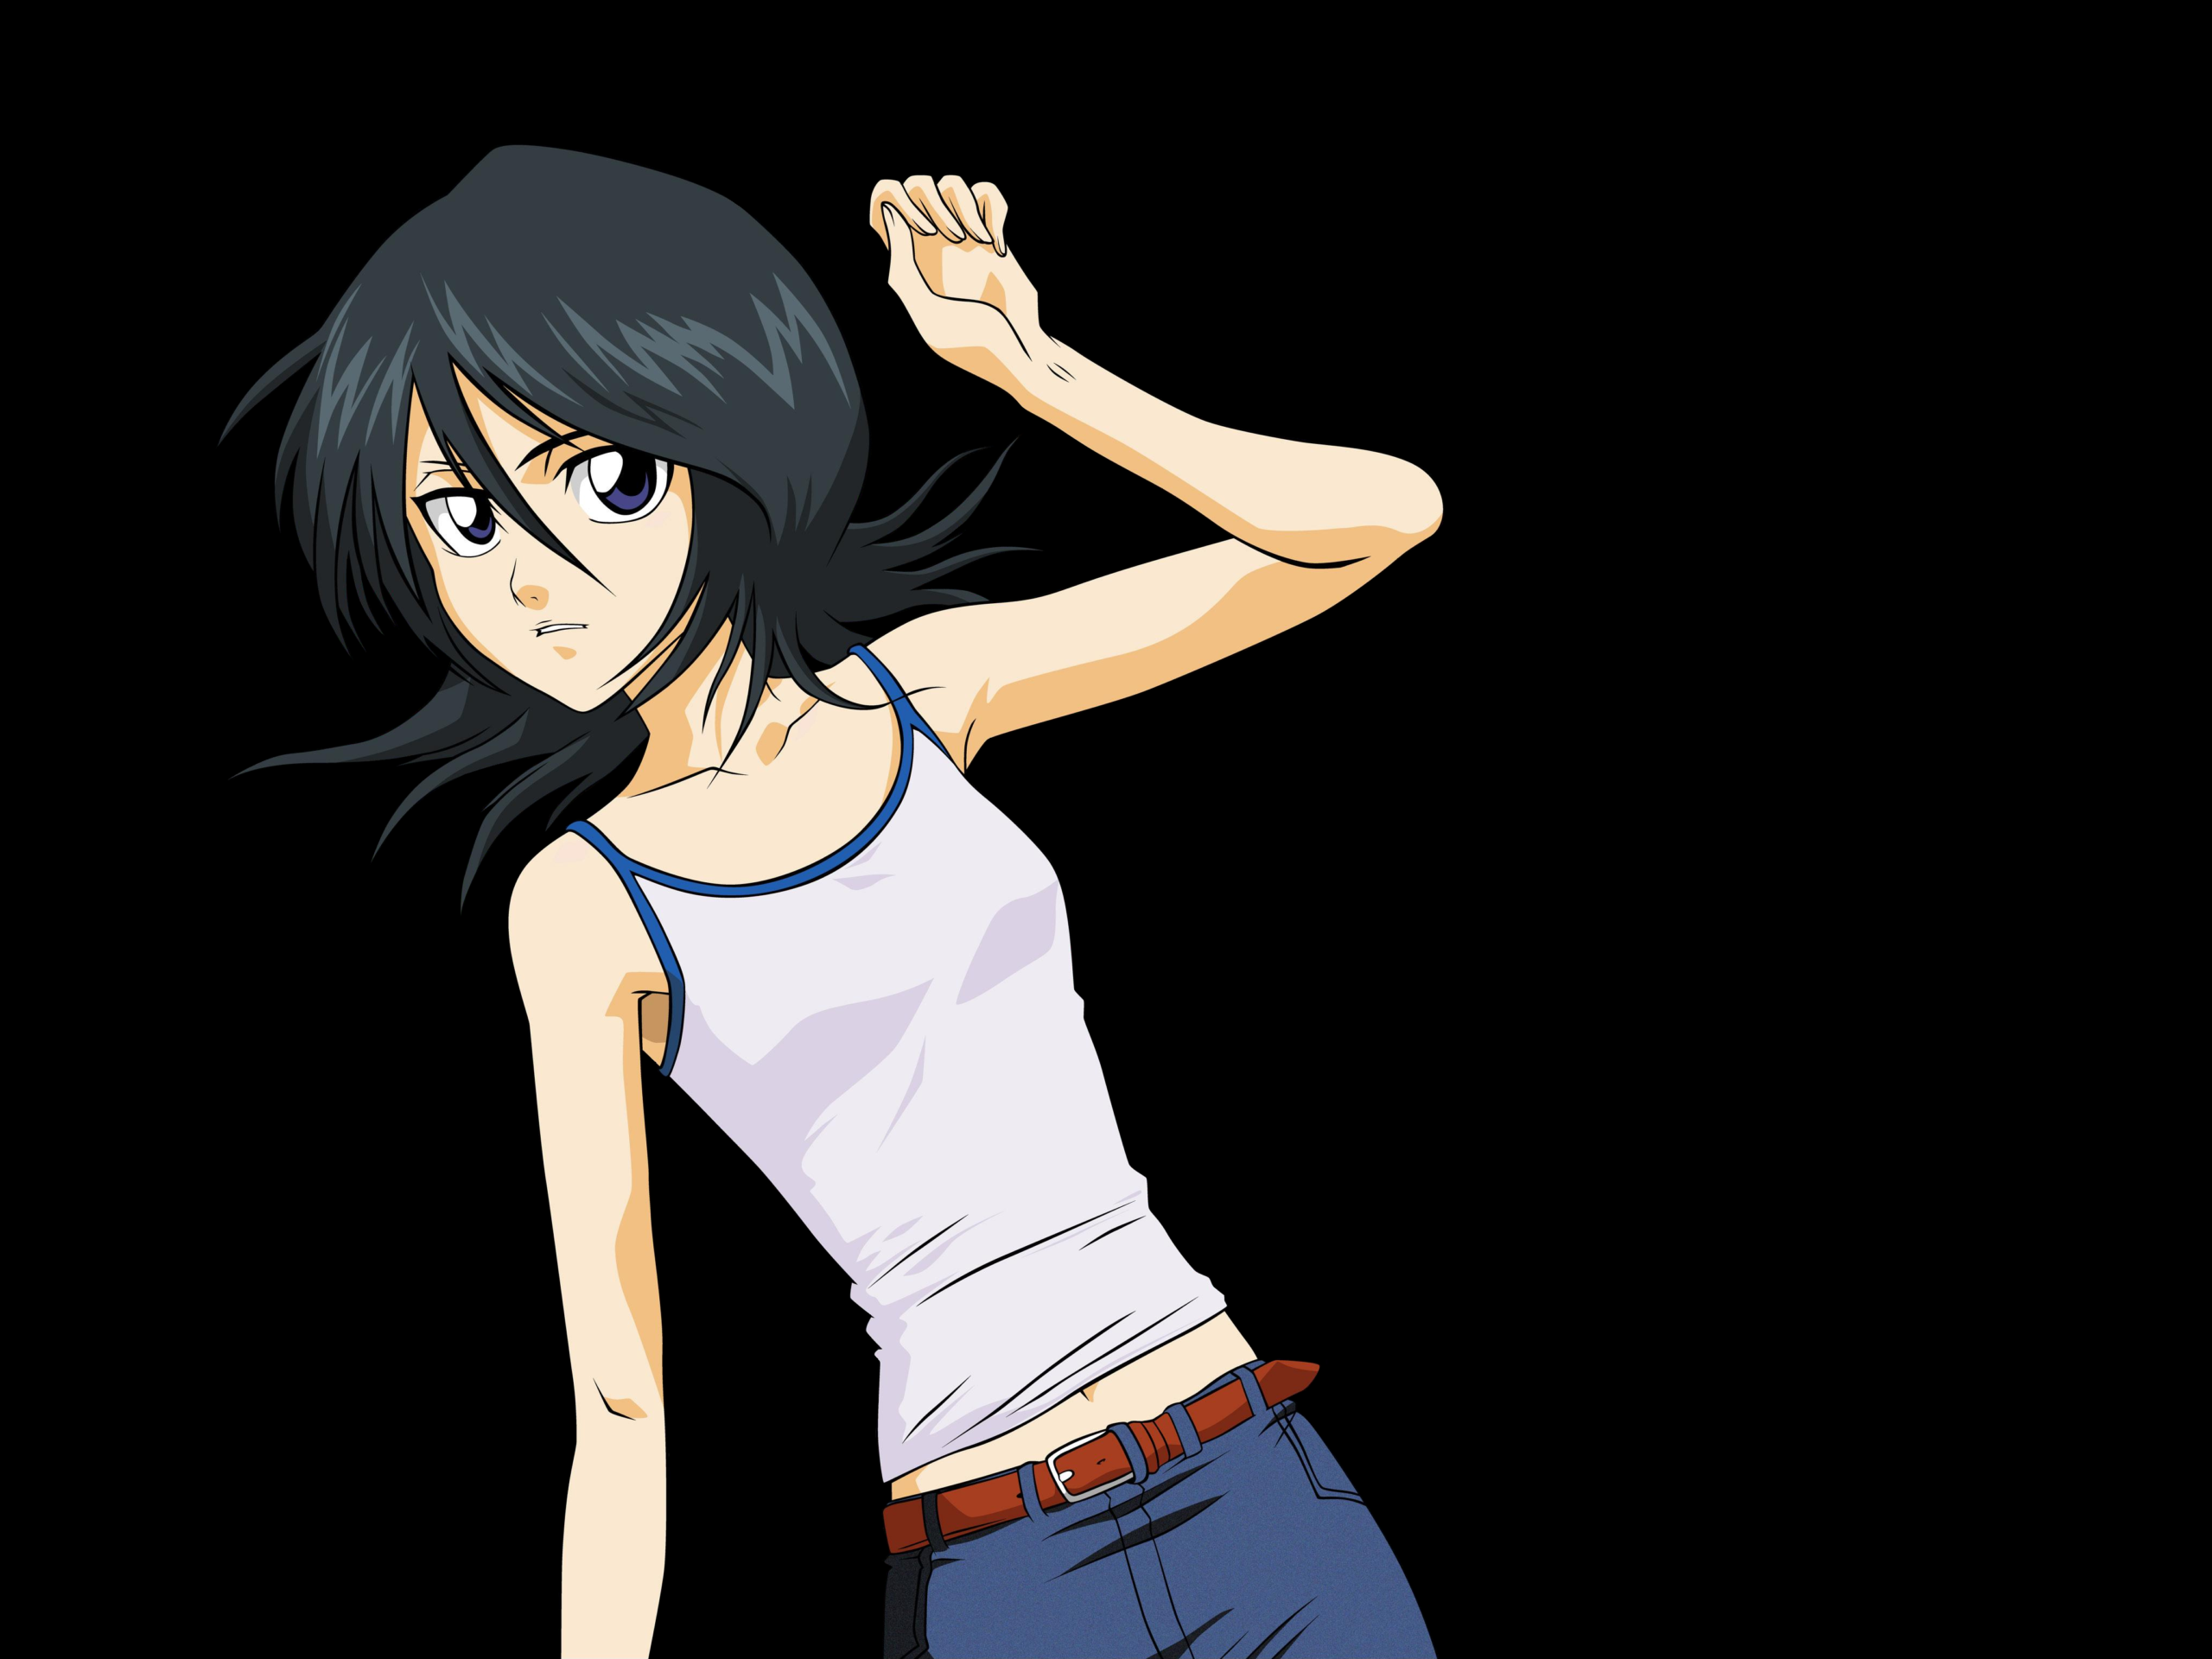 Image Of Rukia Kuchiki Bleach In Casual Clothes